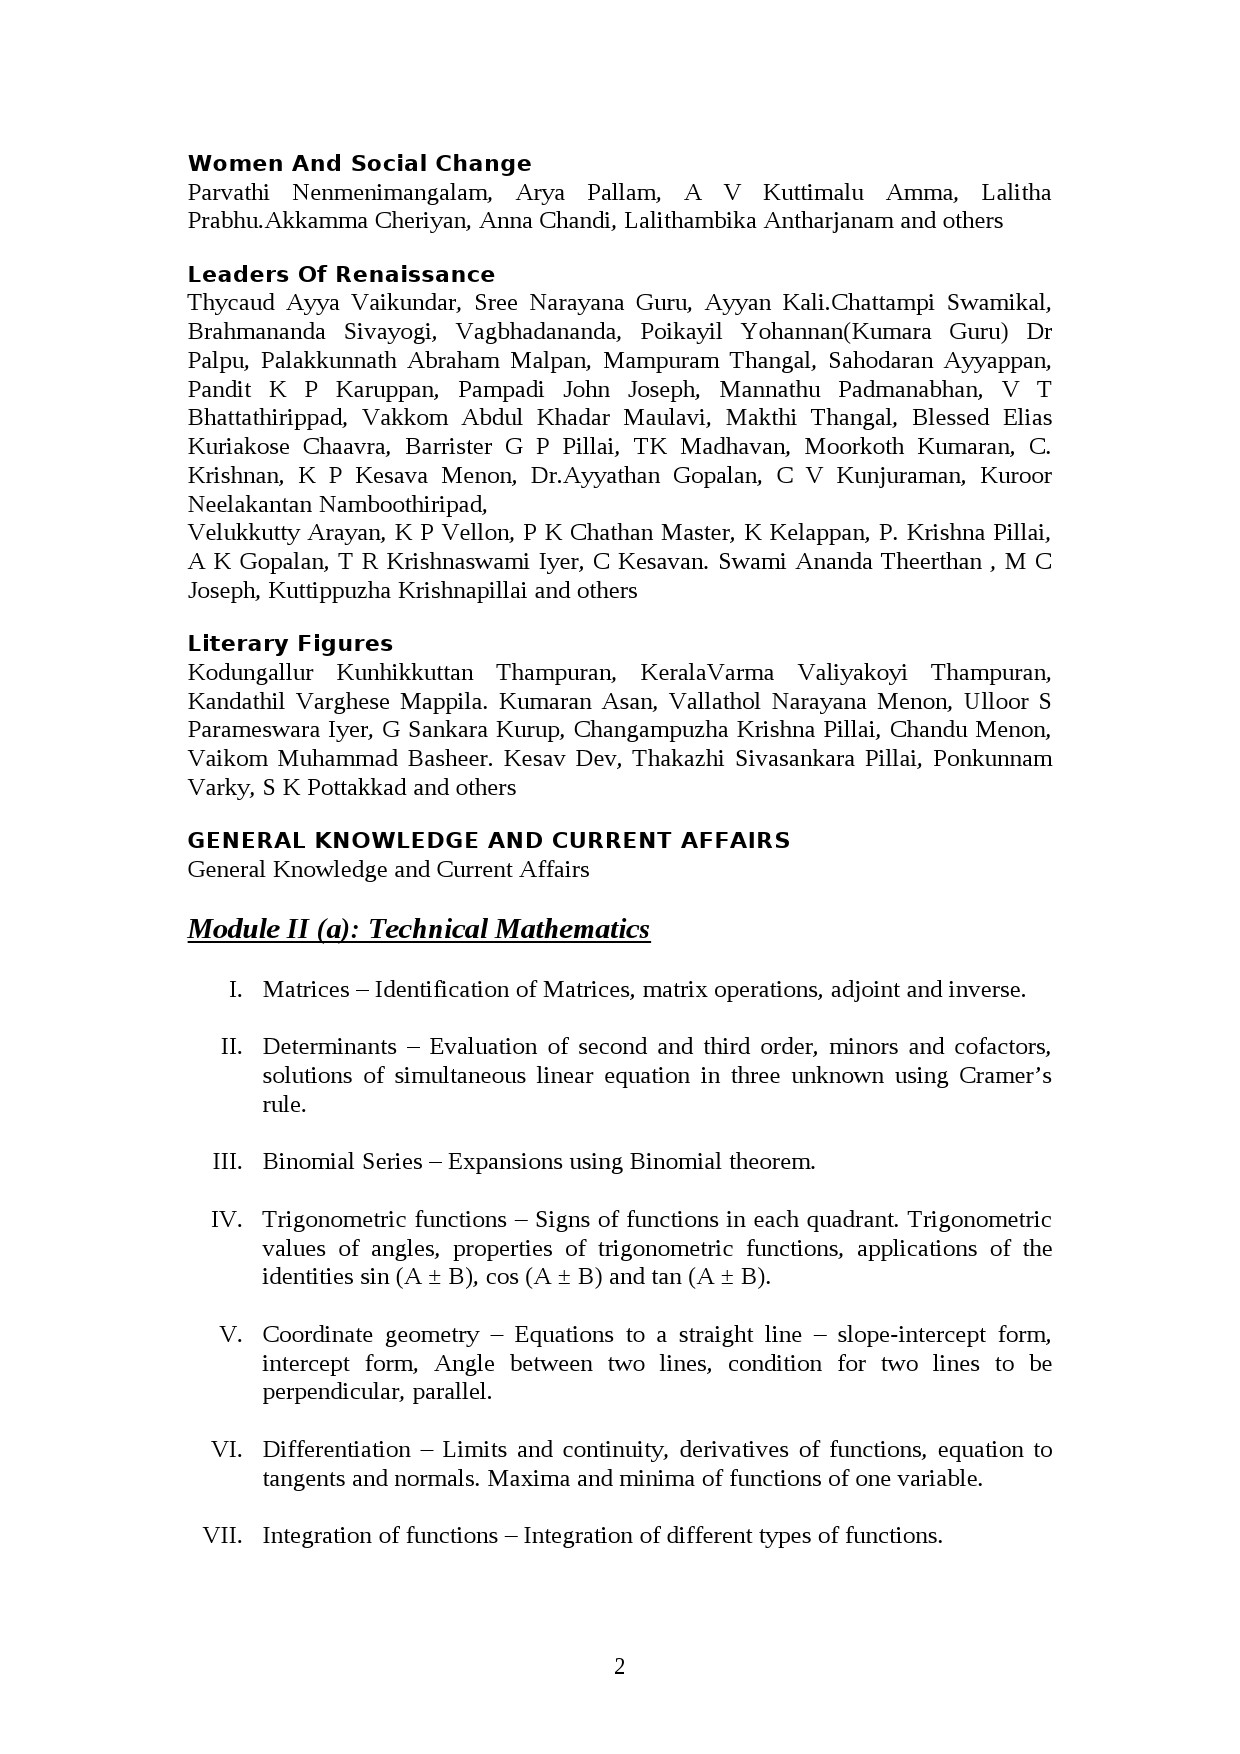 Computer Engineering Lecturer in Polytechnic Exam Syllabus - Notification Image 2